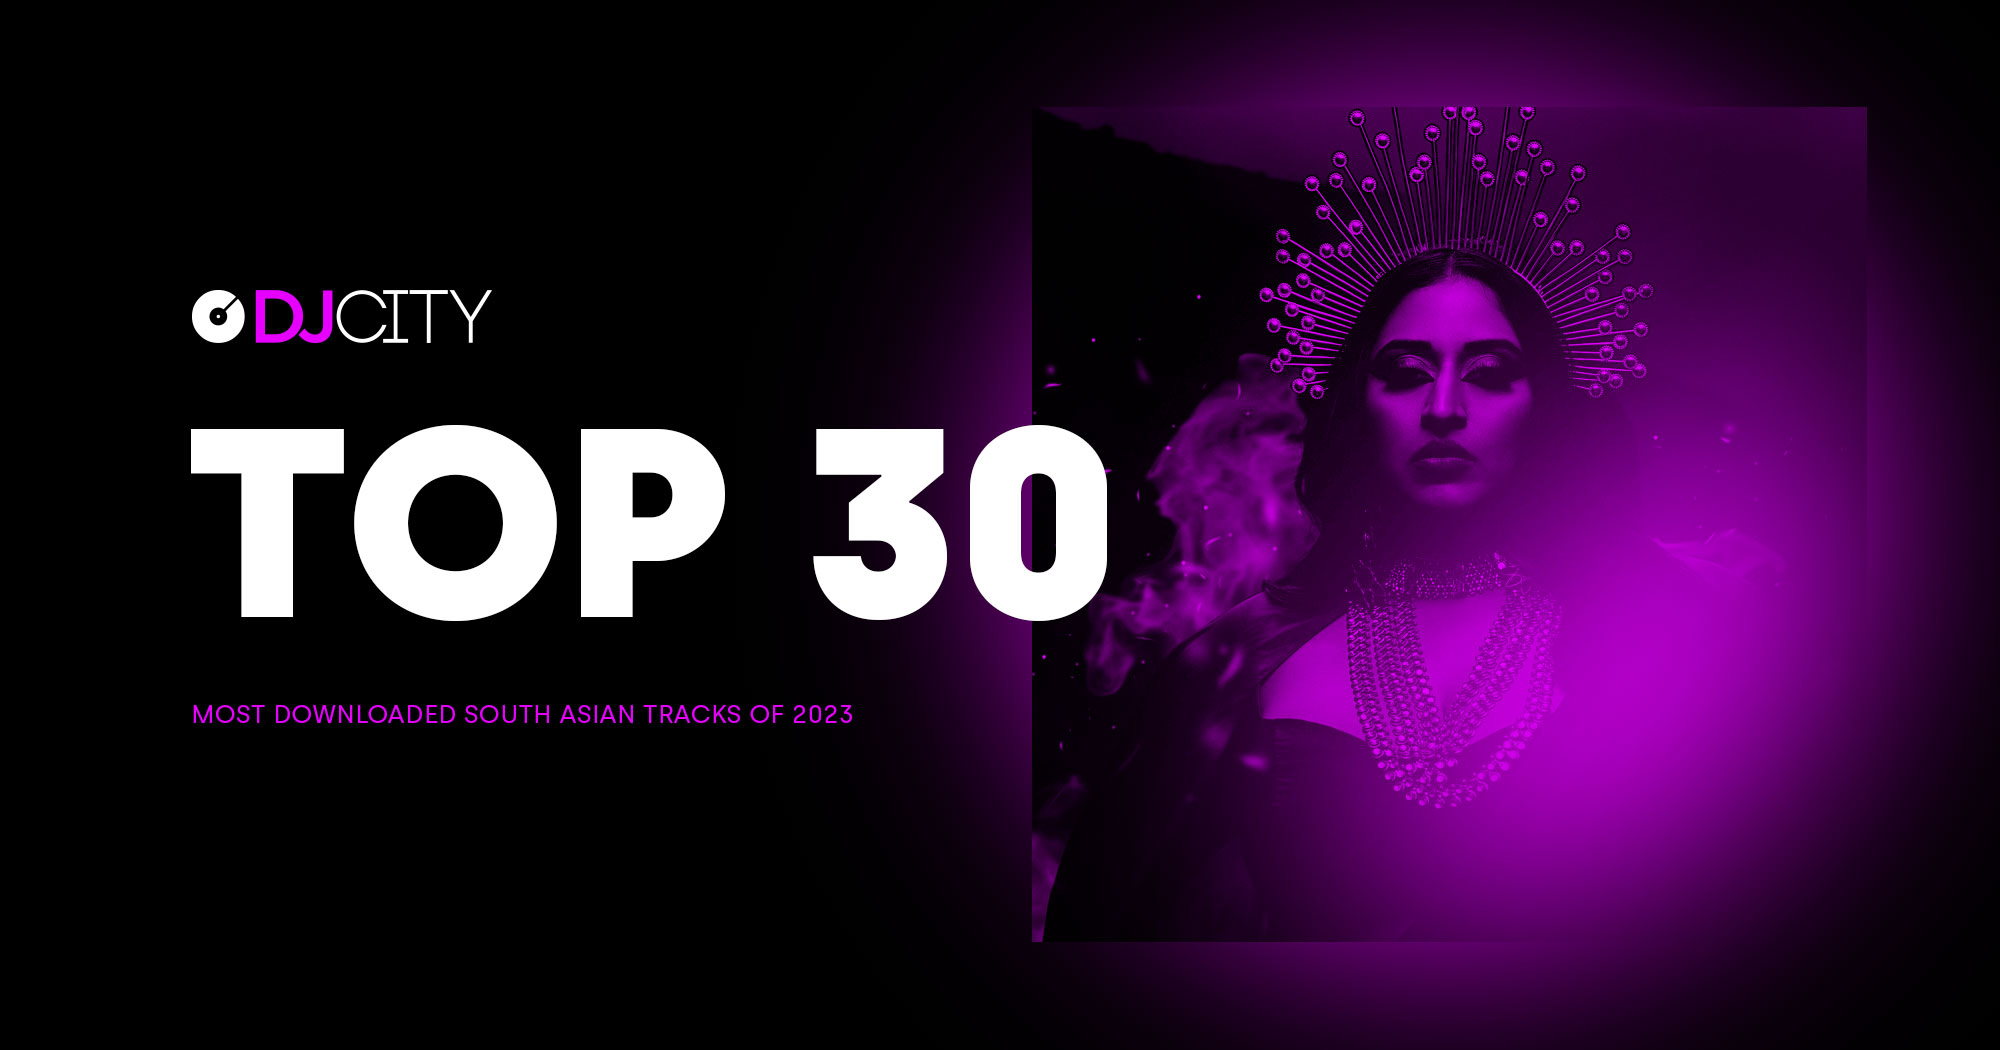 DJcity’s 30 Most Downloaded South Asian Tracks of 2023